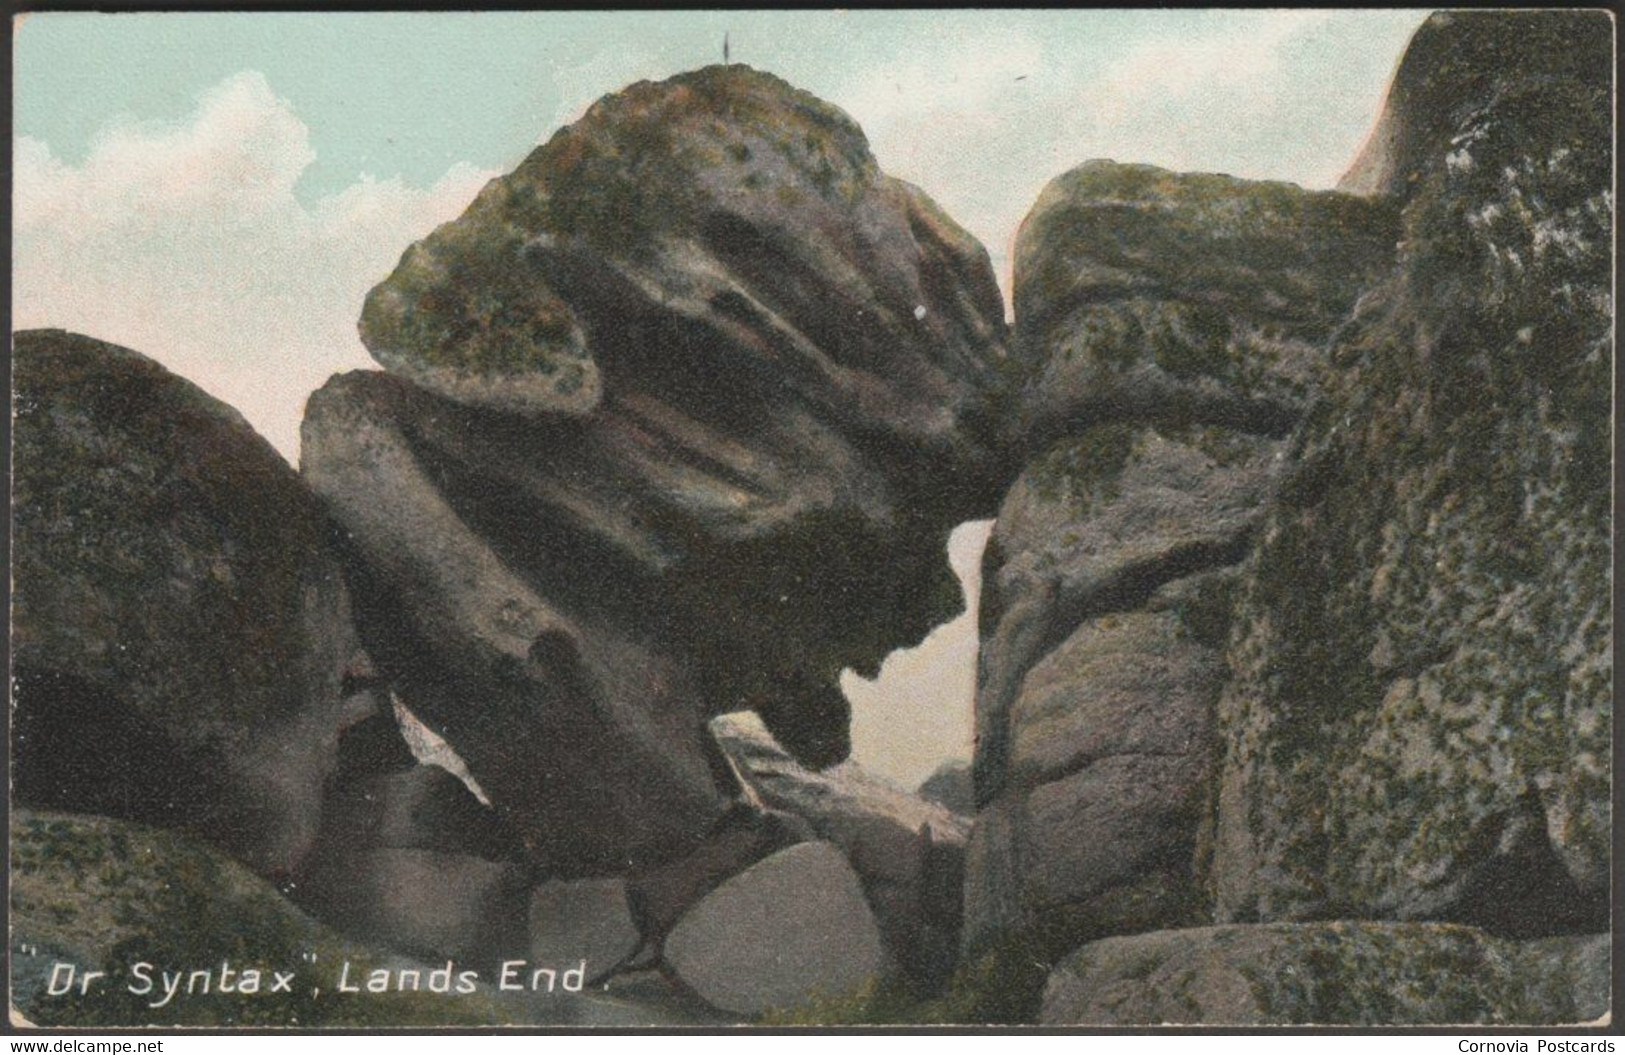 Dr Syntax, Lands End, Cornwall, C.1905-10 - Williams Postcard - Land's End